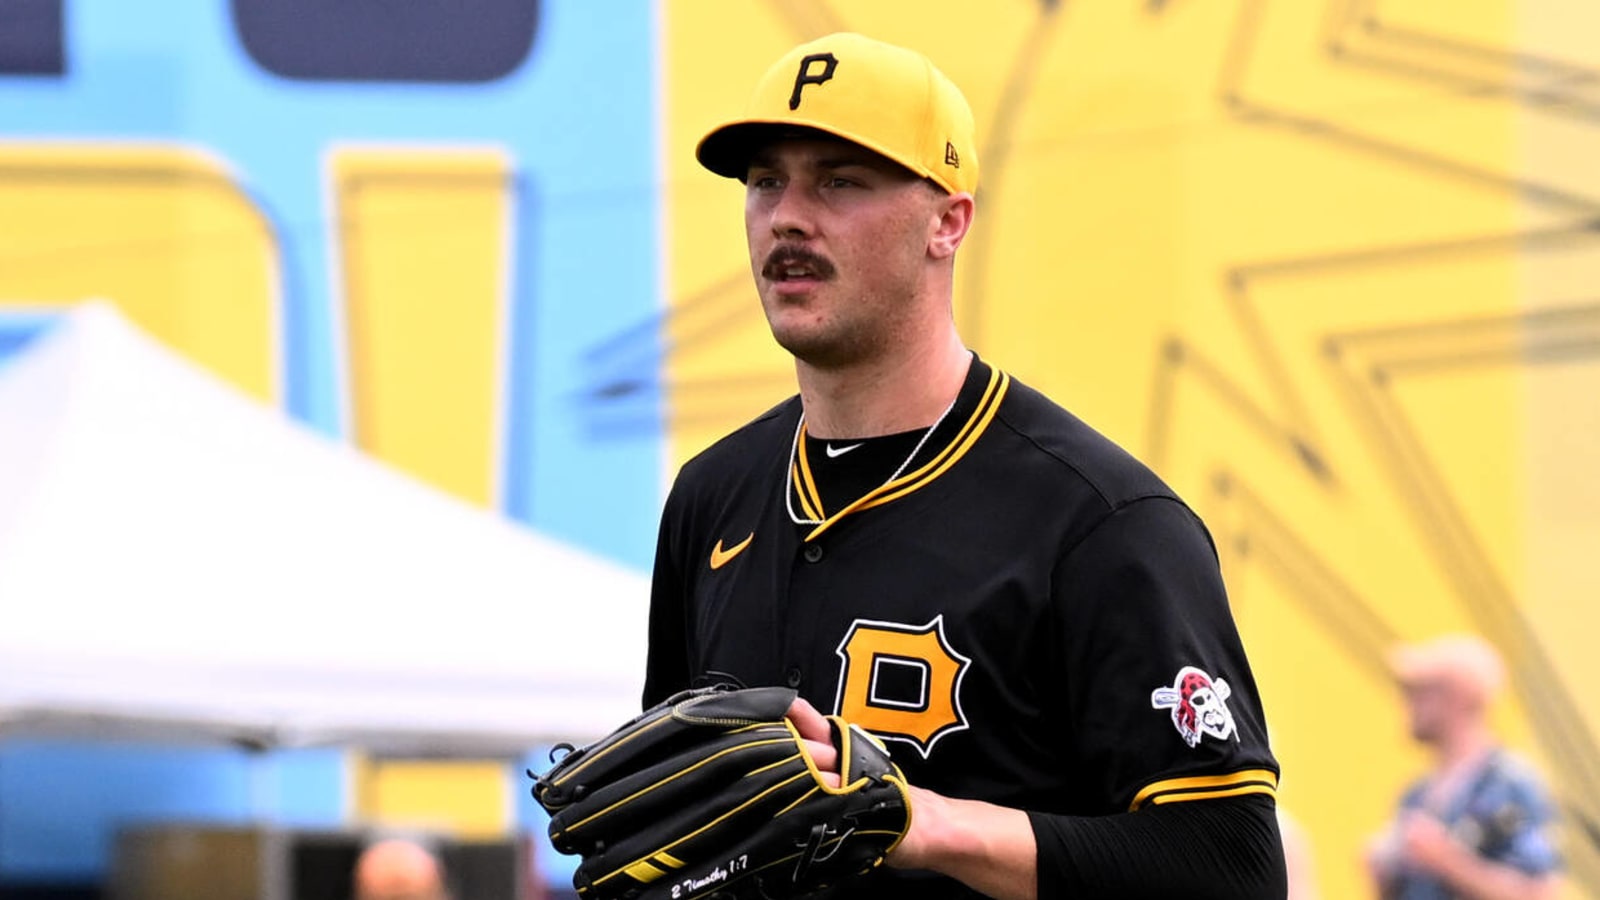 After Several Attempts, Paul Skenes Finally Received Call to Pirates